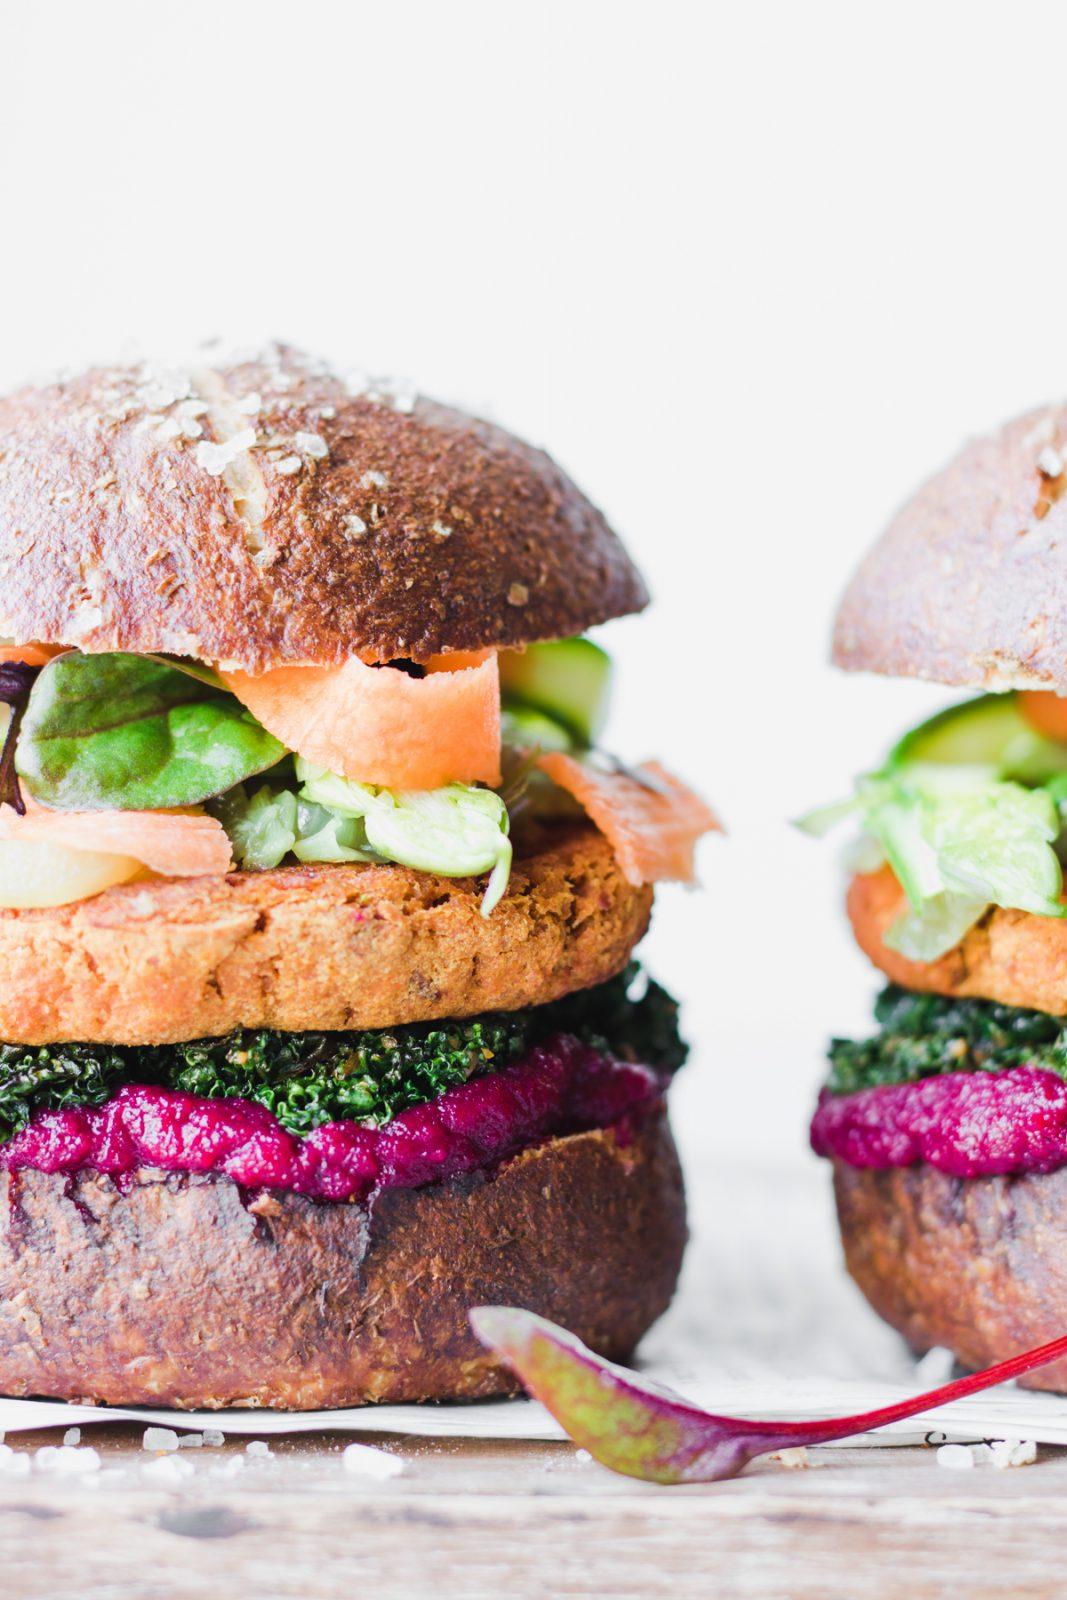 Pretzel buns and veg chickpeas burgers with beetroot ketchup, caramelized onions and stewed kale